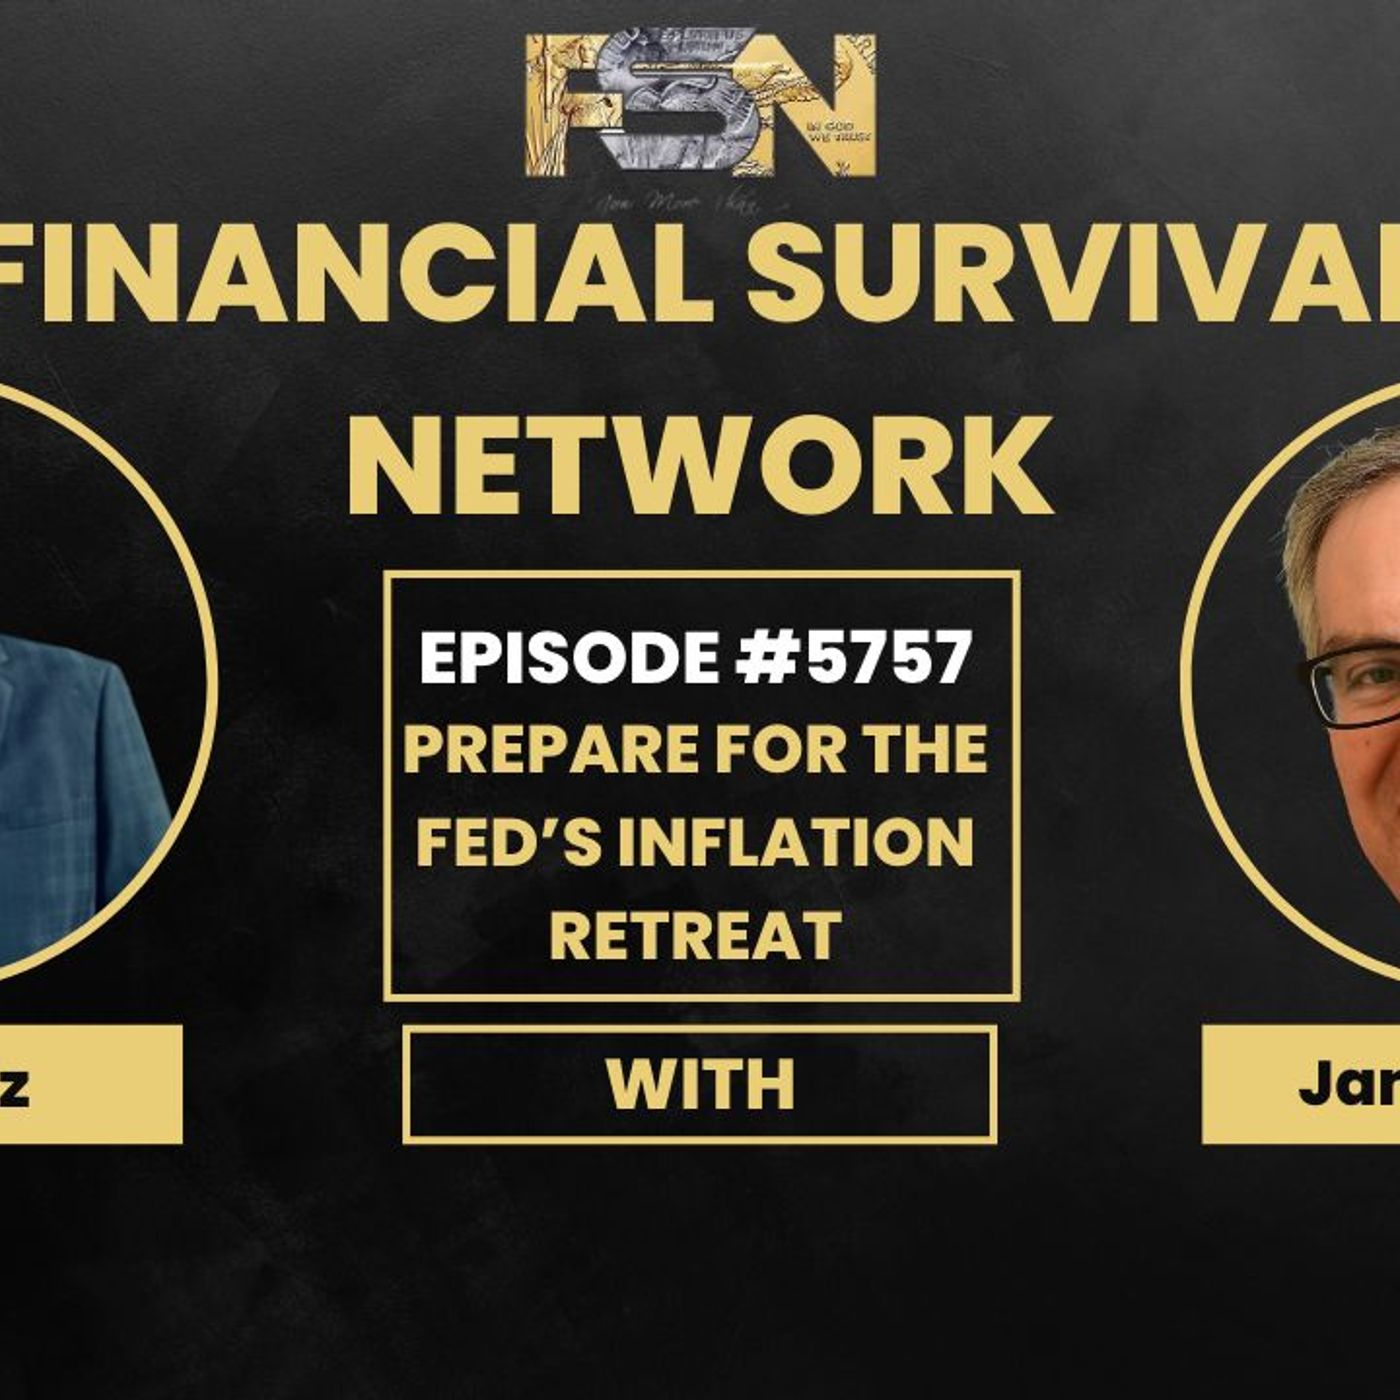 Prepare for the Fed’s Inflation Retreat - James Locke #5757